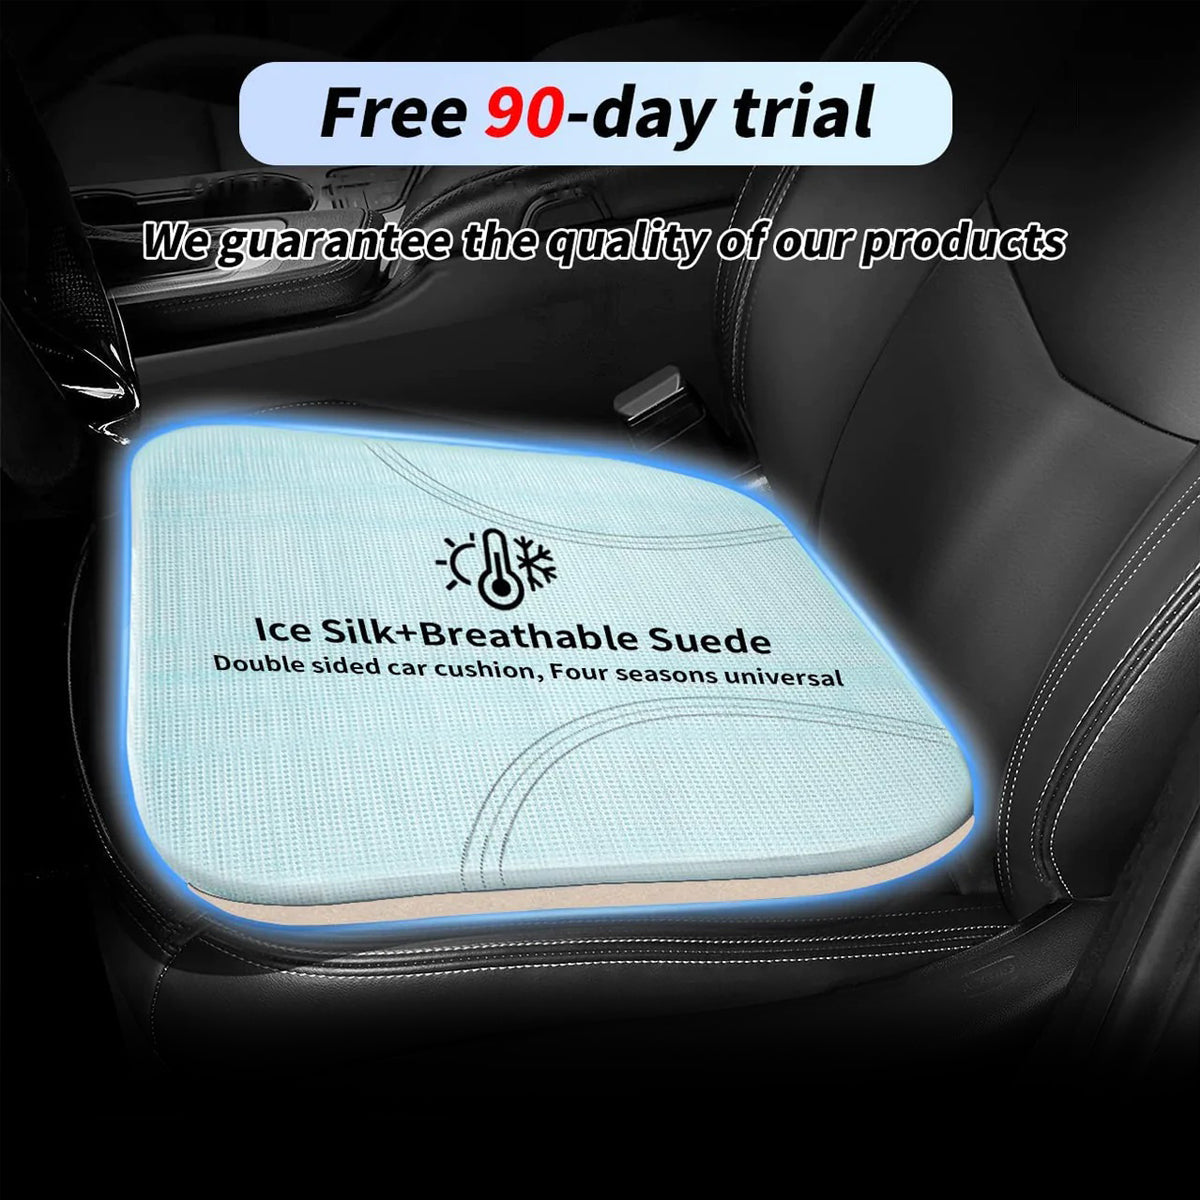 Delicate Leather Car Seat Cushion, Custom For Cars, Car Memory Foam Seat Cushion, Heightening Seat Cushion, Seat Cushion for Car and Office Chair MC19999 - Delicate Leather